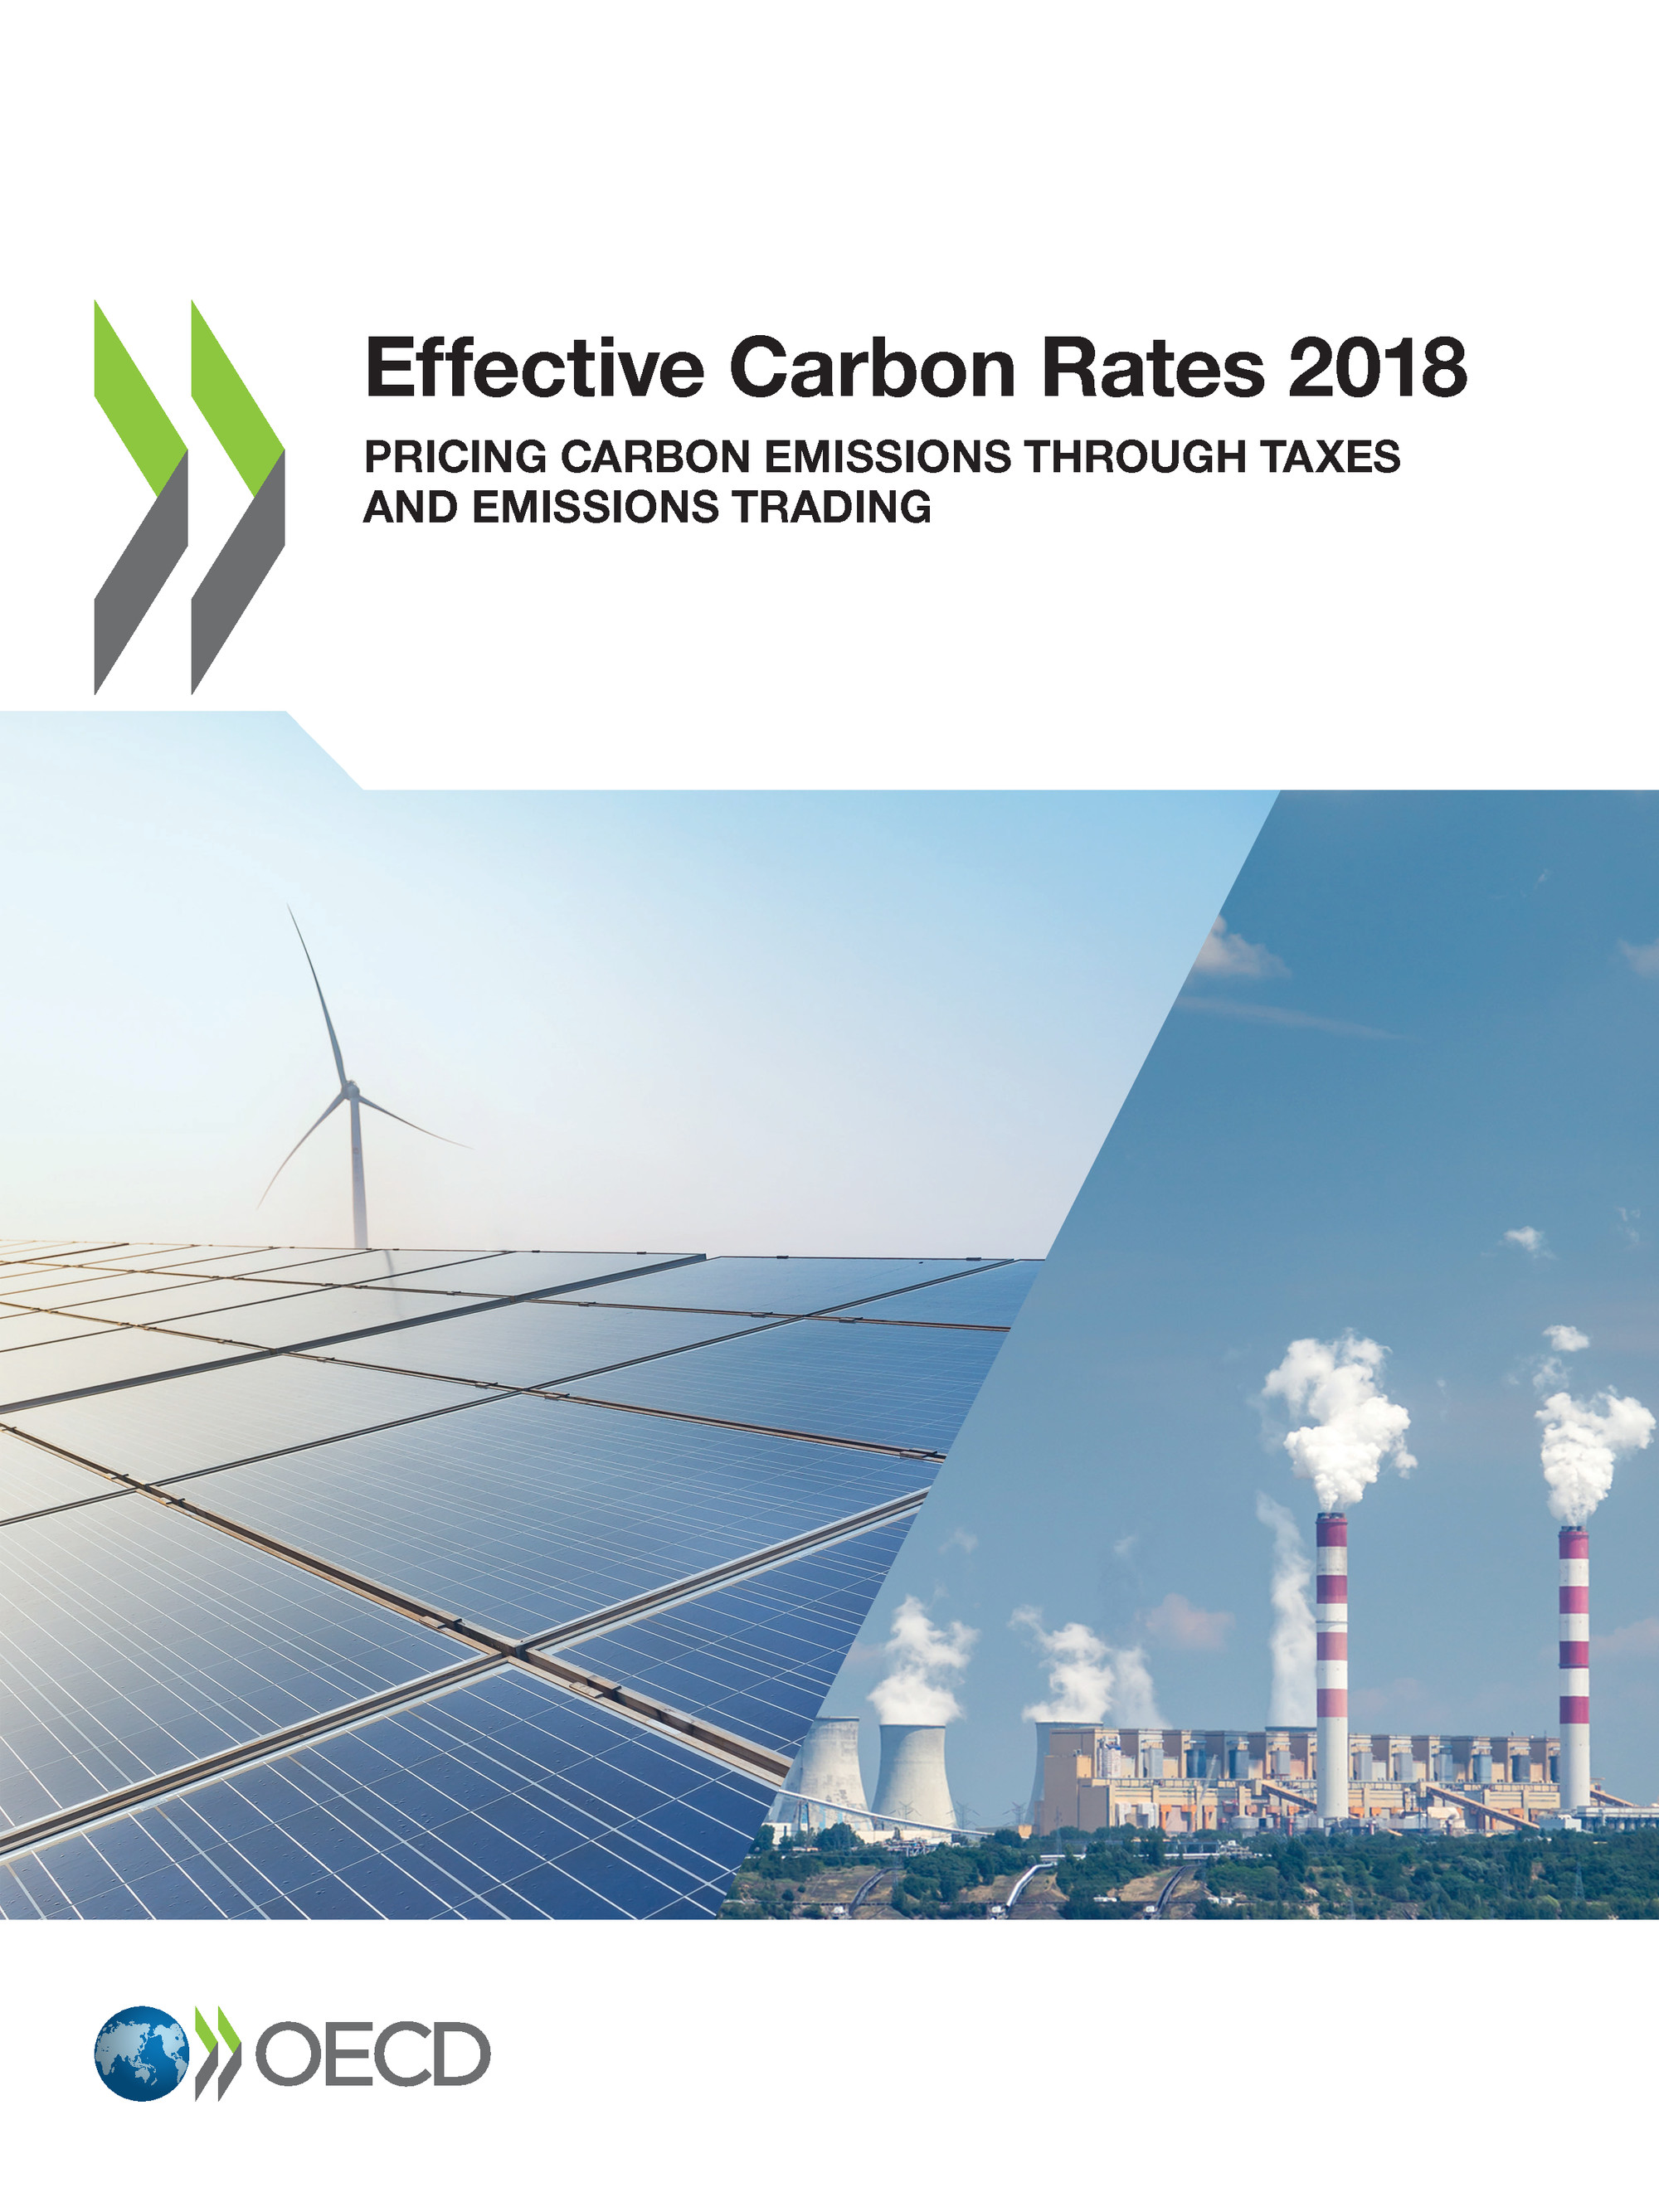 Effective Carbon Rates 2018 -  Collectif - OCDE / OECD